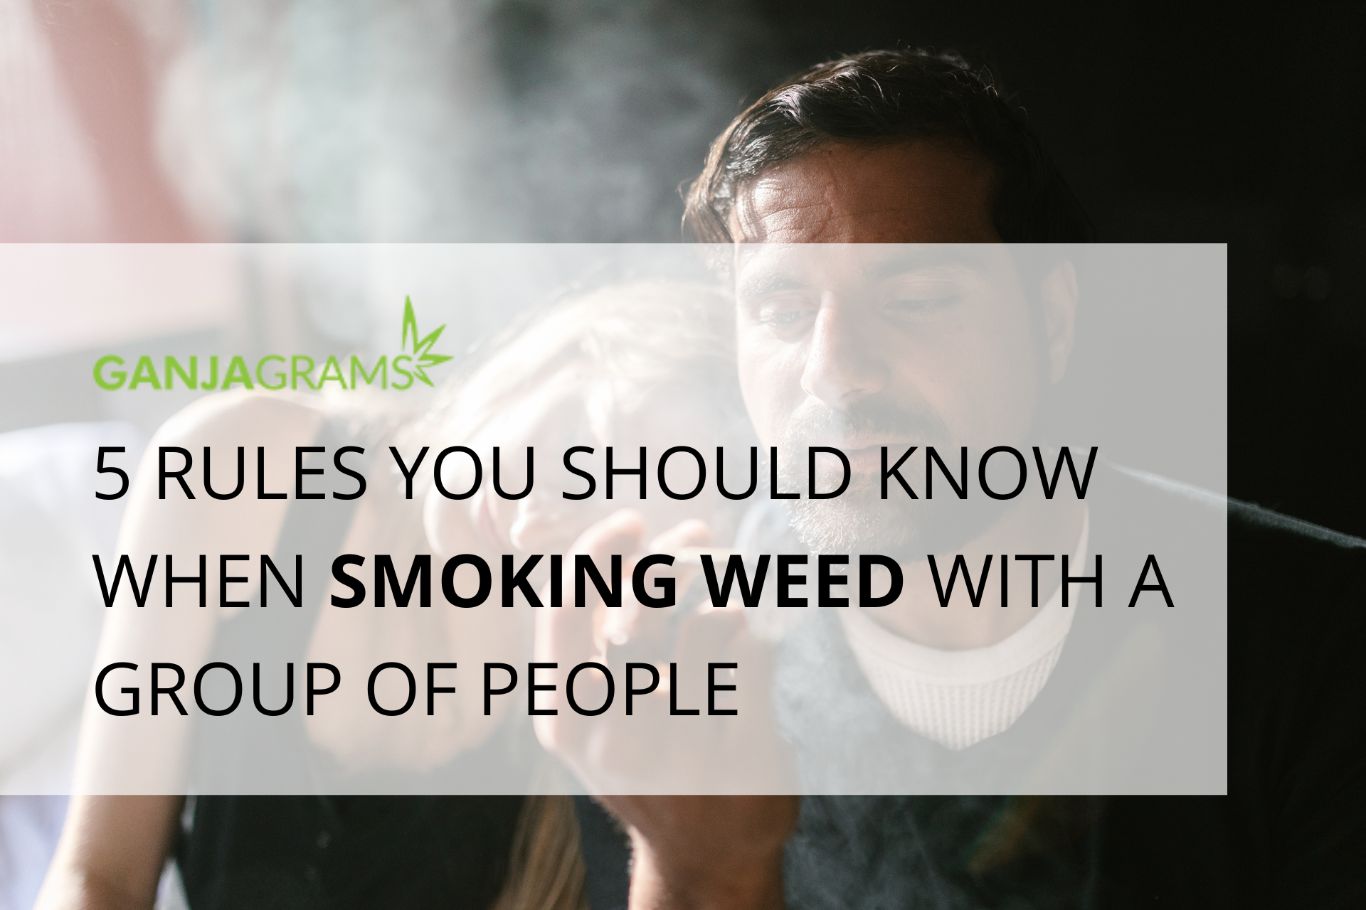 5 Rules You Should Know When Smoking Weed with a Group of People